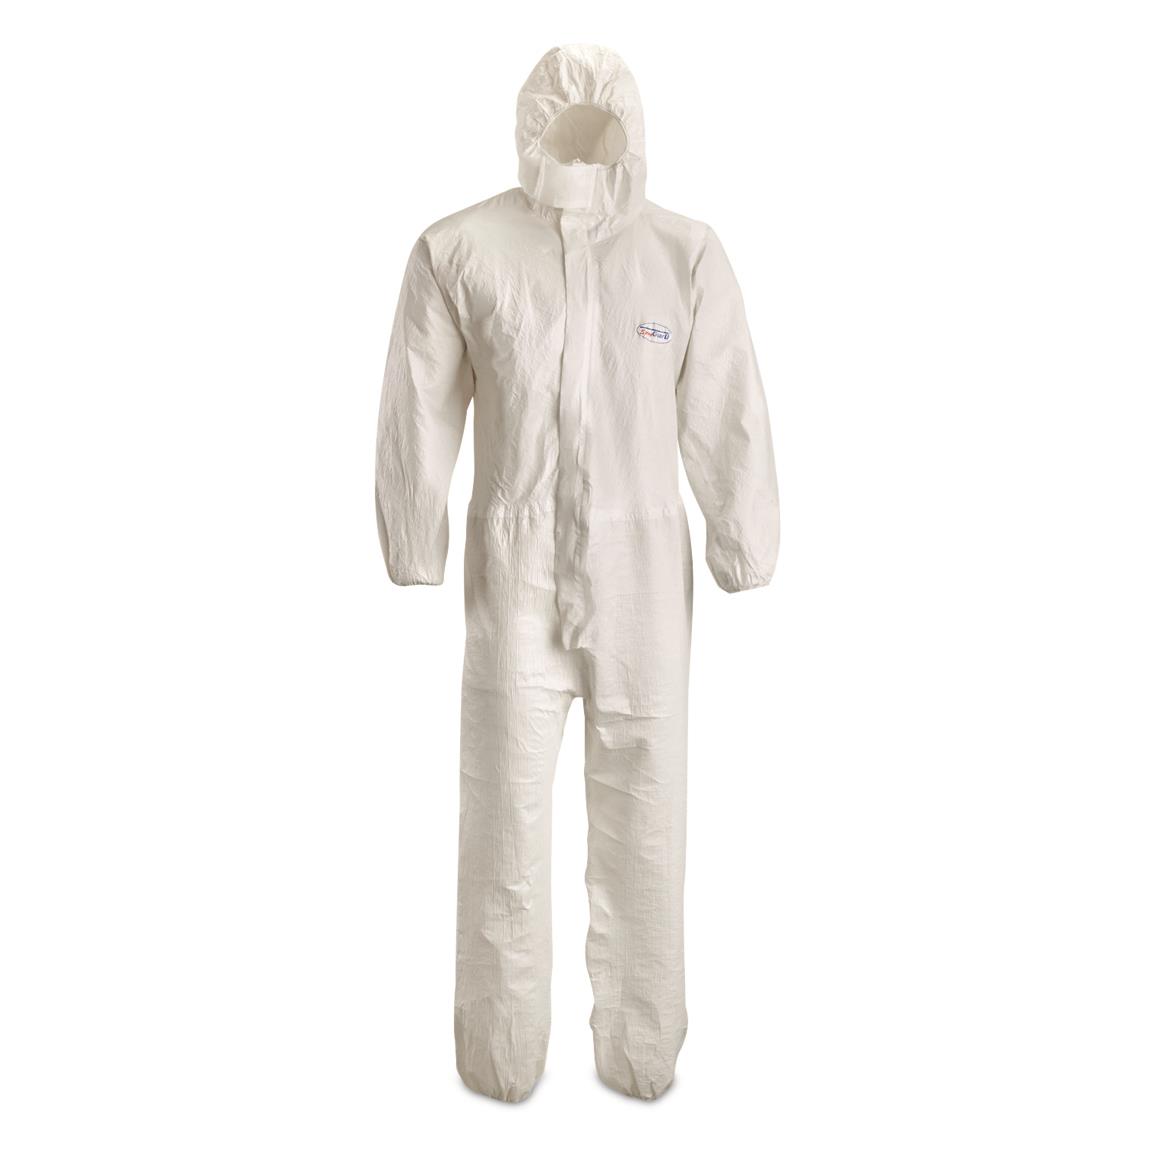 U.S. Military Surplus Indutex Chemical Protection Suit, New, White